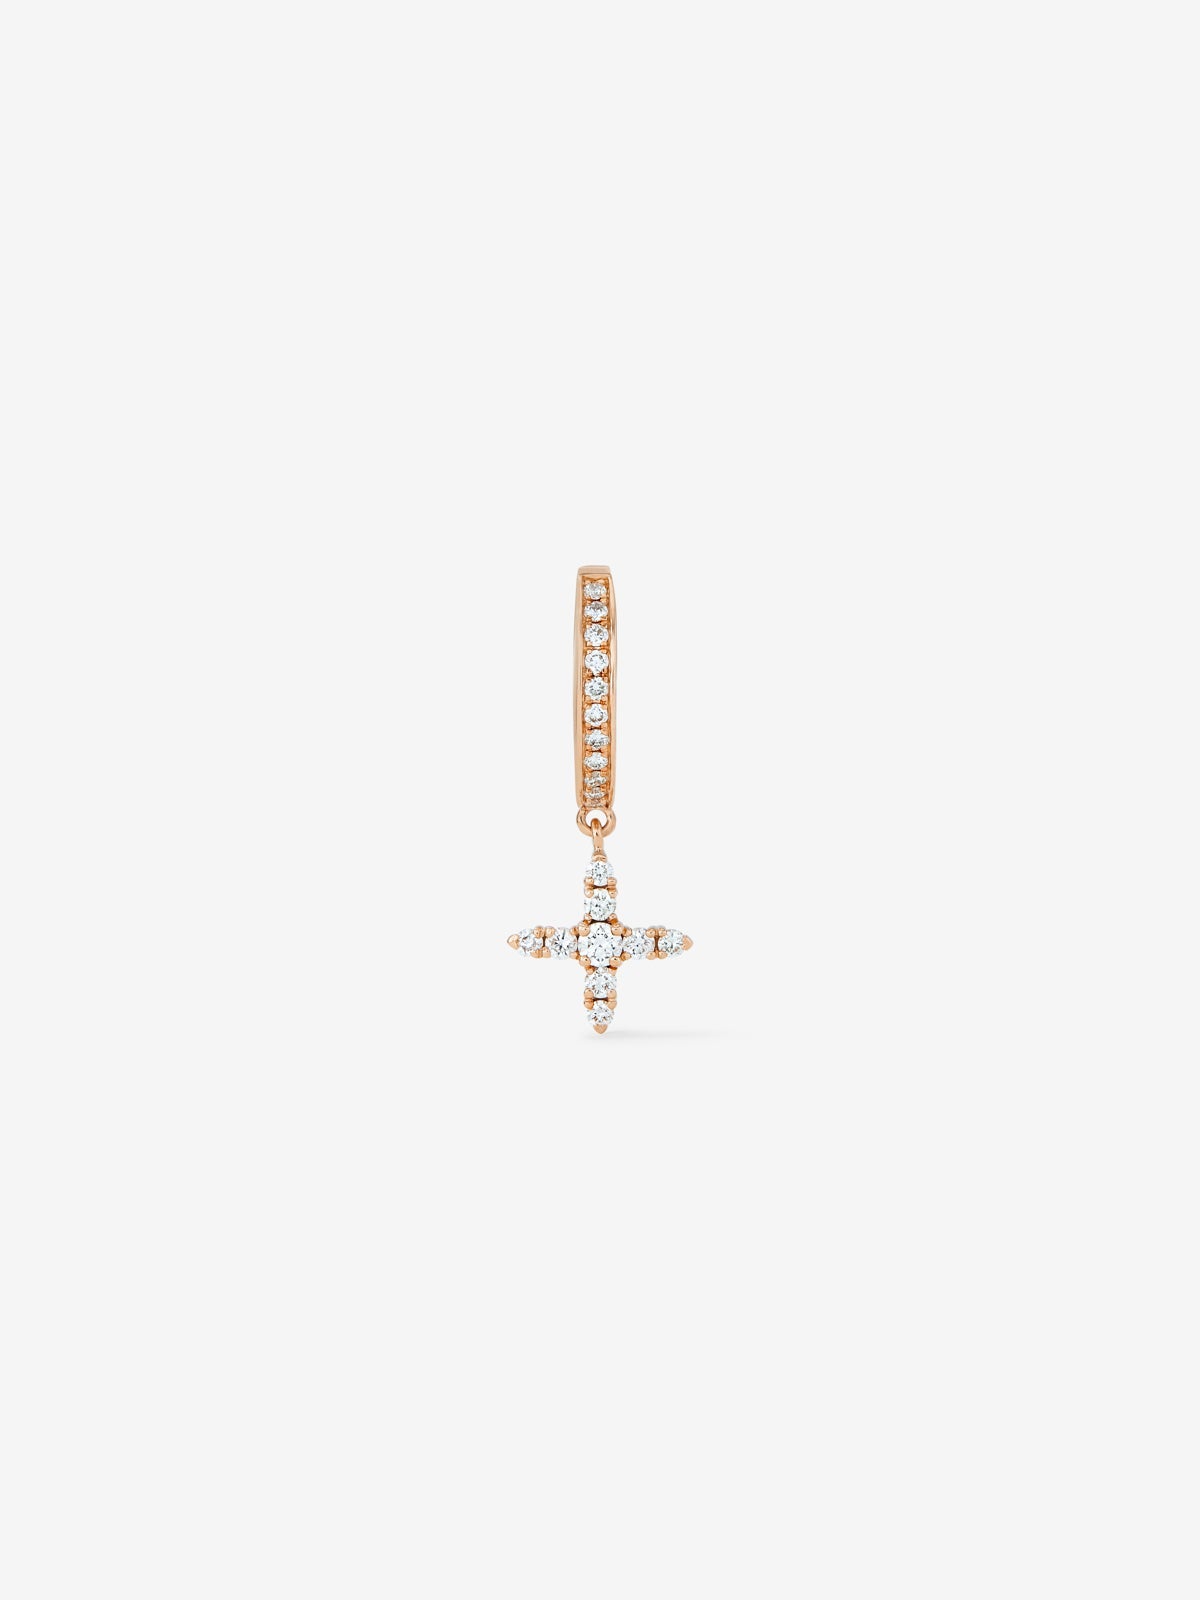 Individual hoop earring with hanging star in 18K rose gold with diamonds.